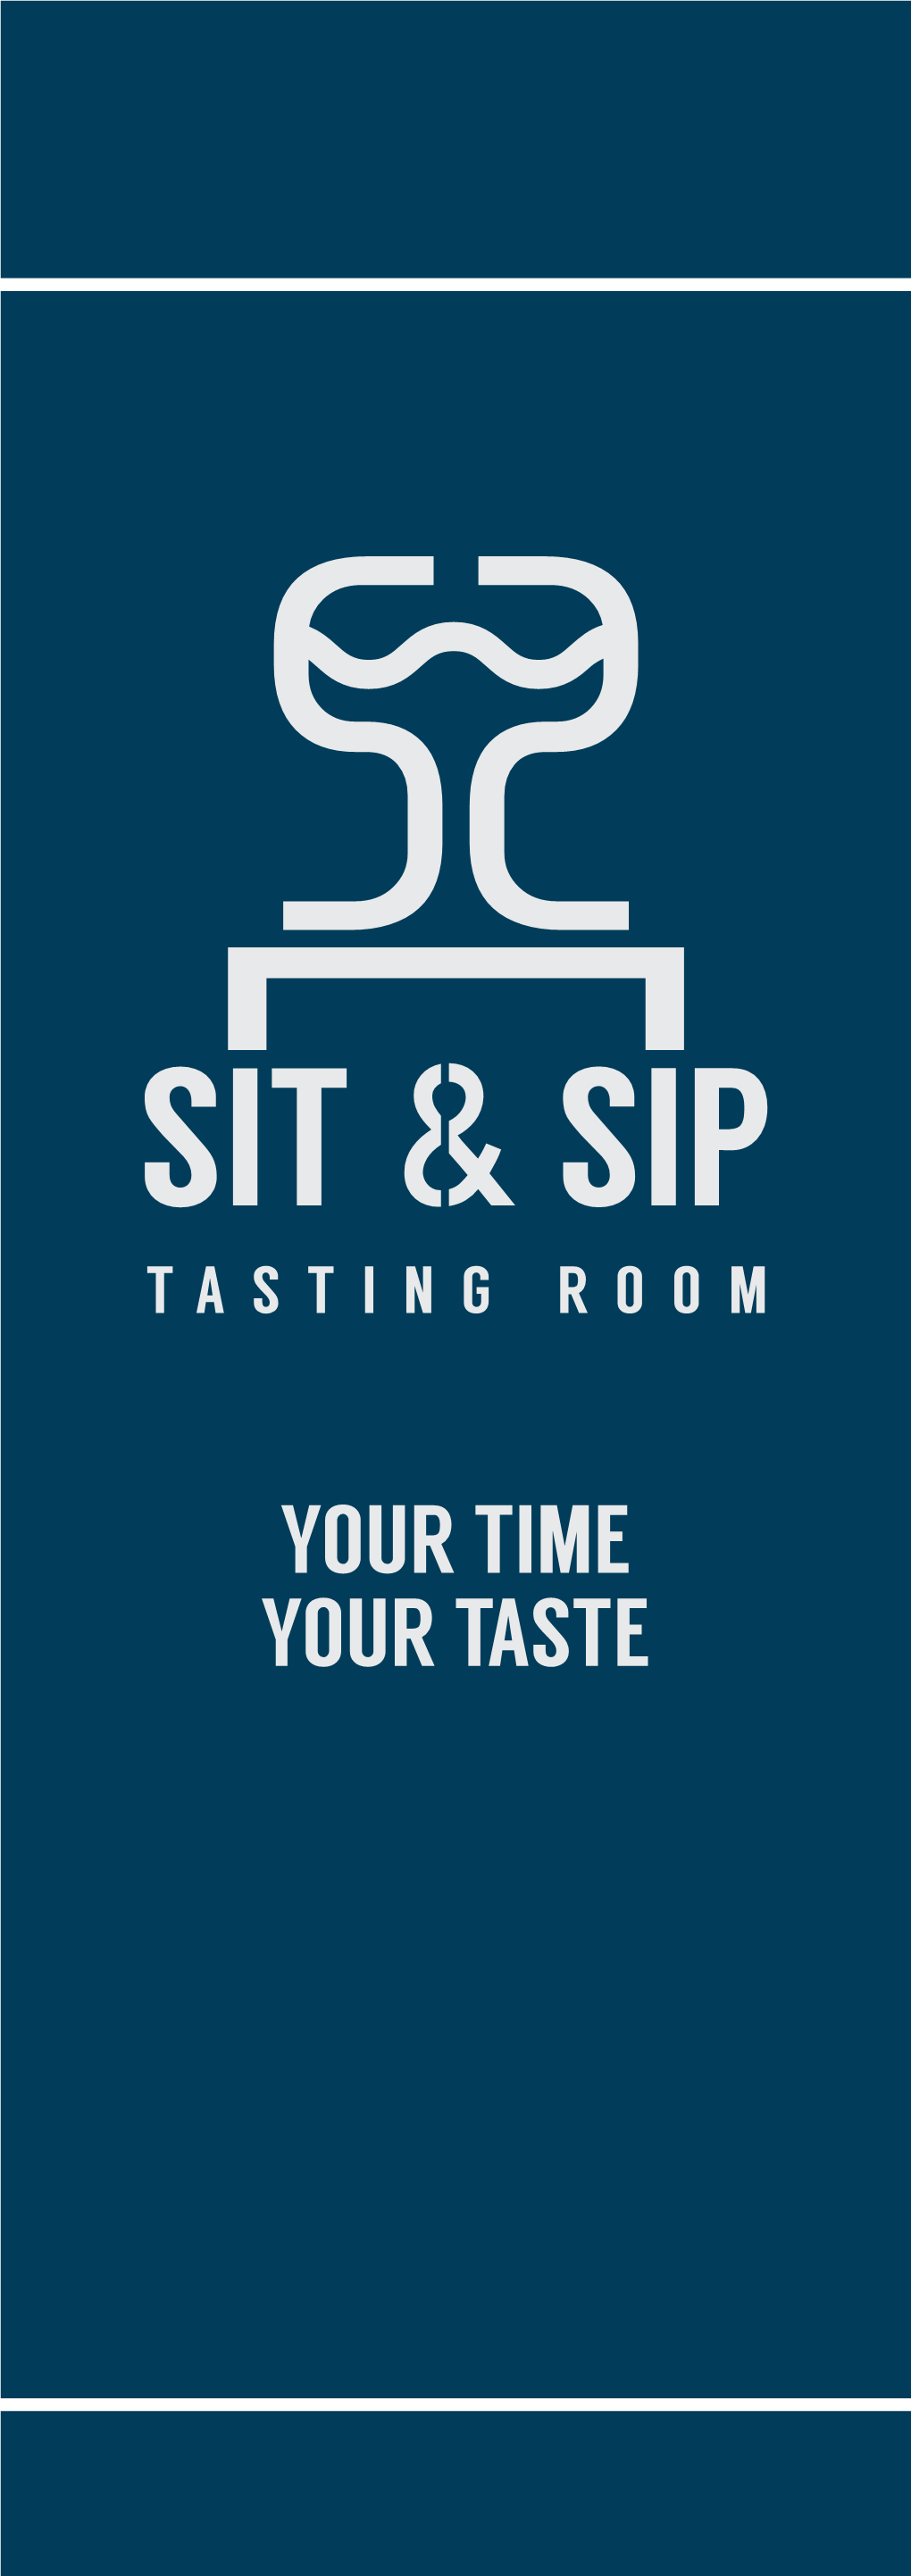 10184 Sit and Sip Menu Horsham Single Pages FINAL.Indd